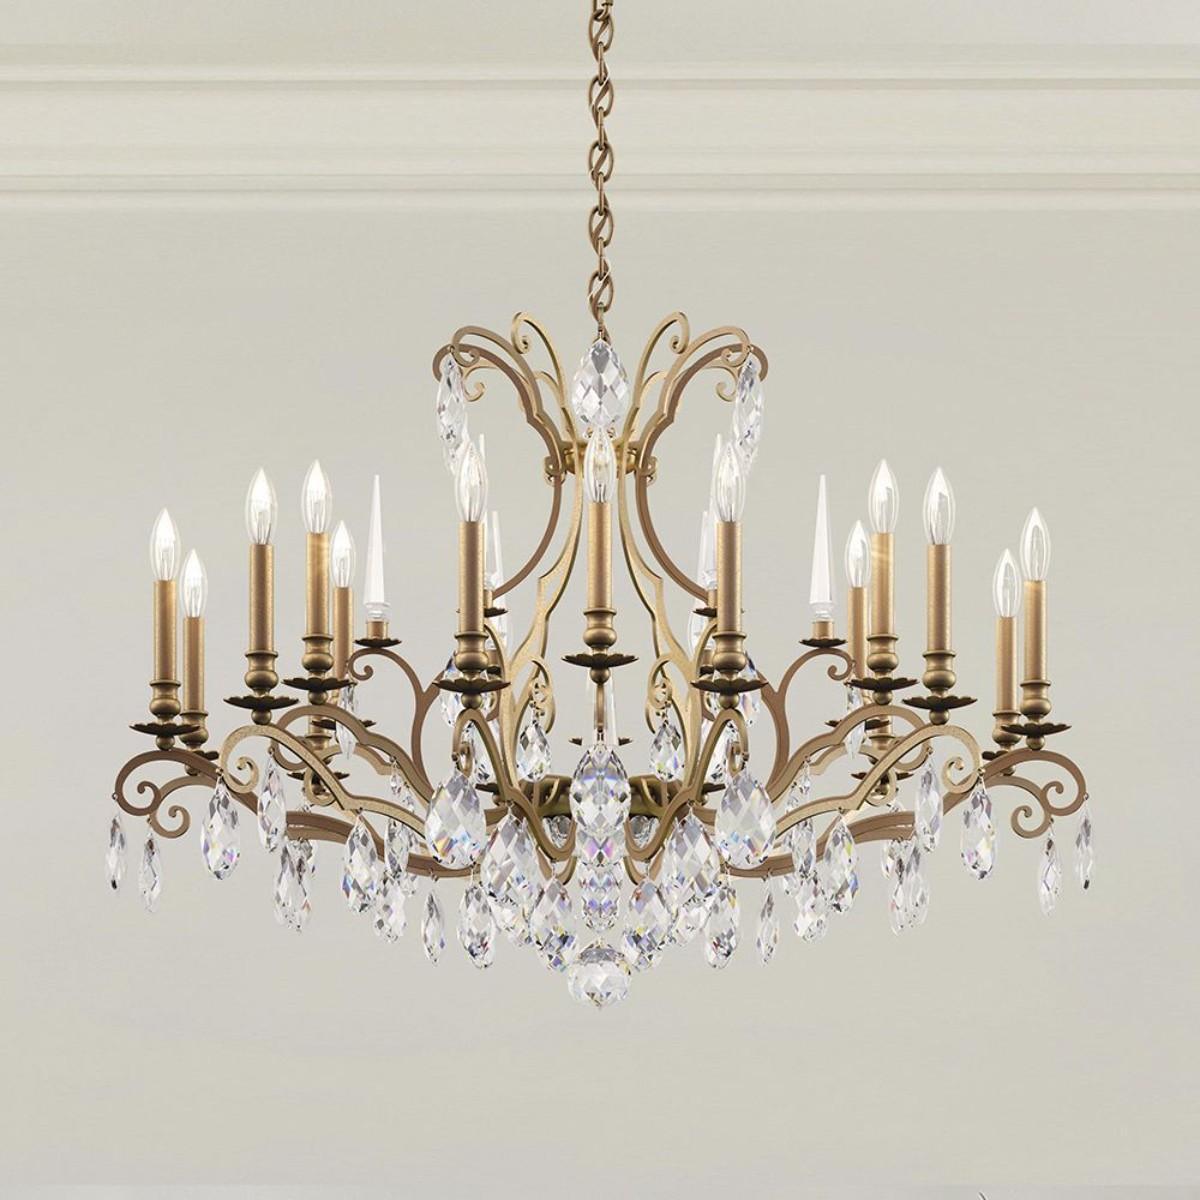 Renaissance Nouveau 18 Light Chandelier with Heritage Crystal - Bees Lighting